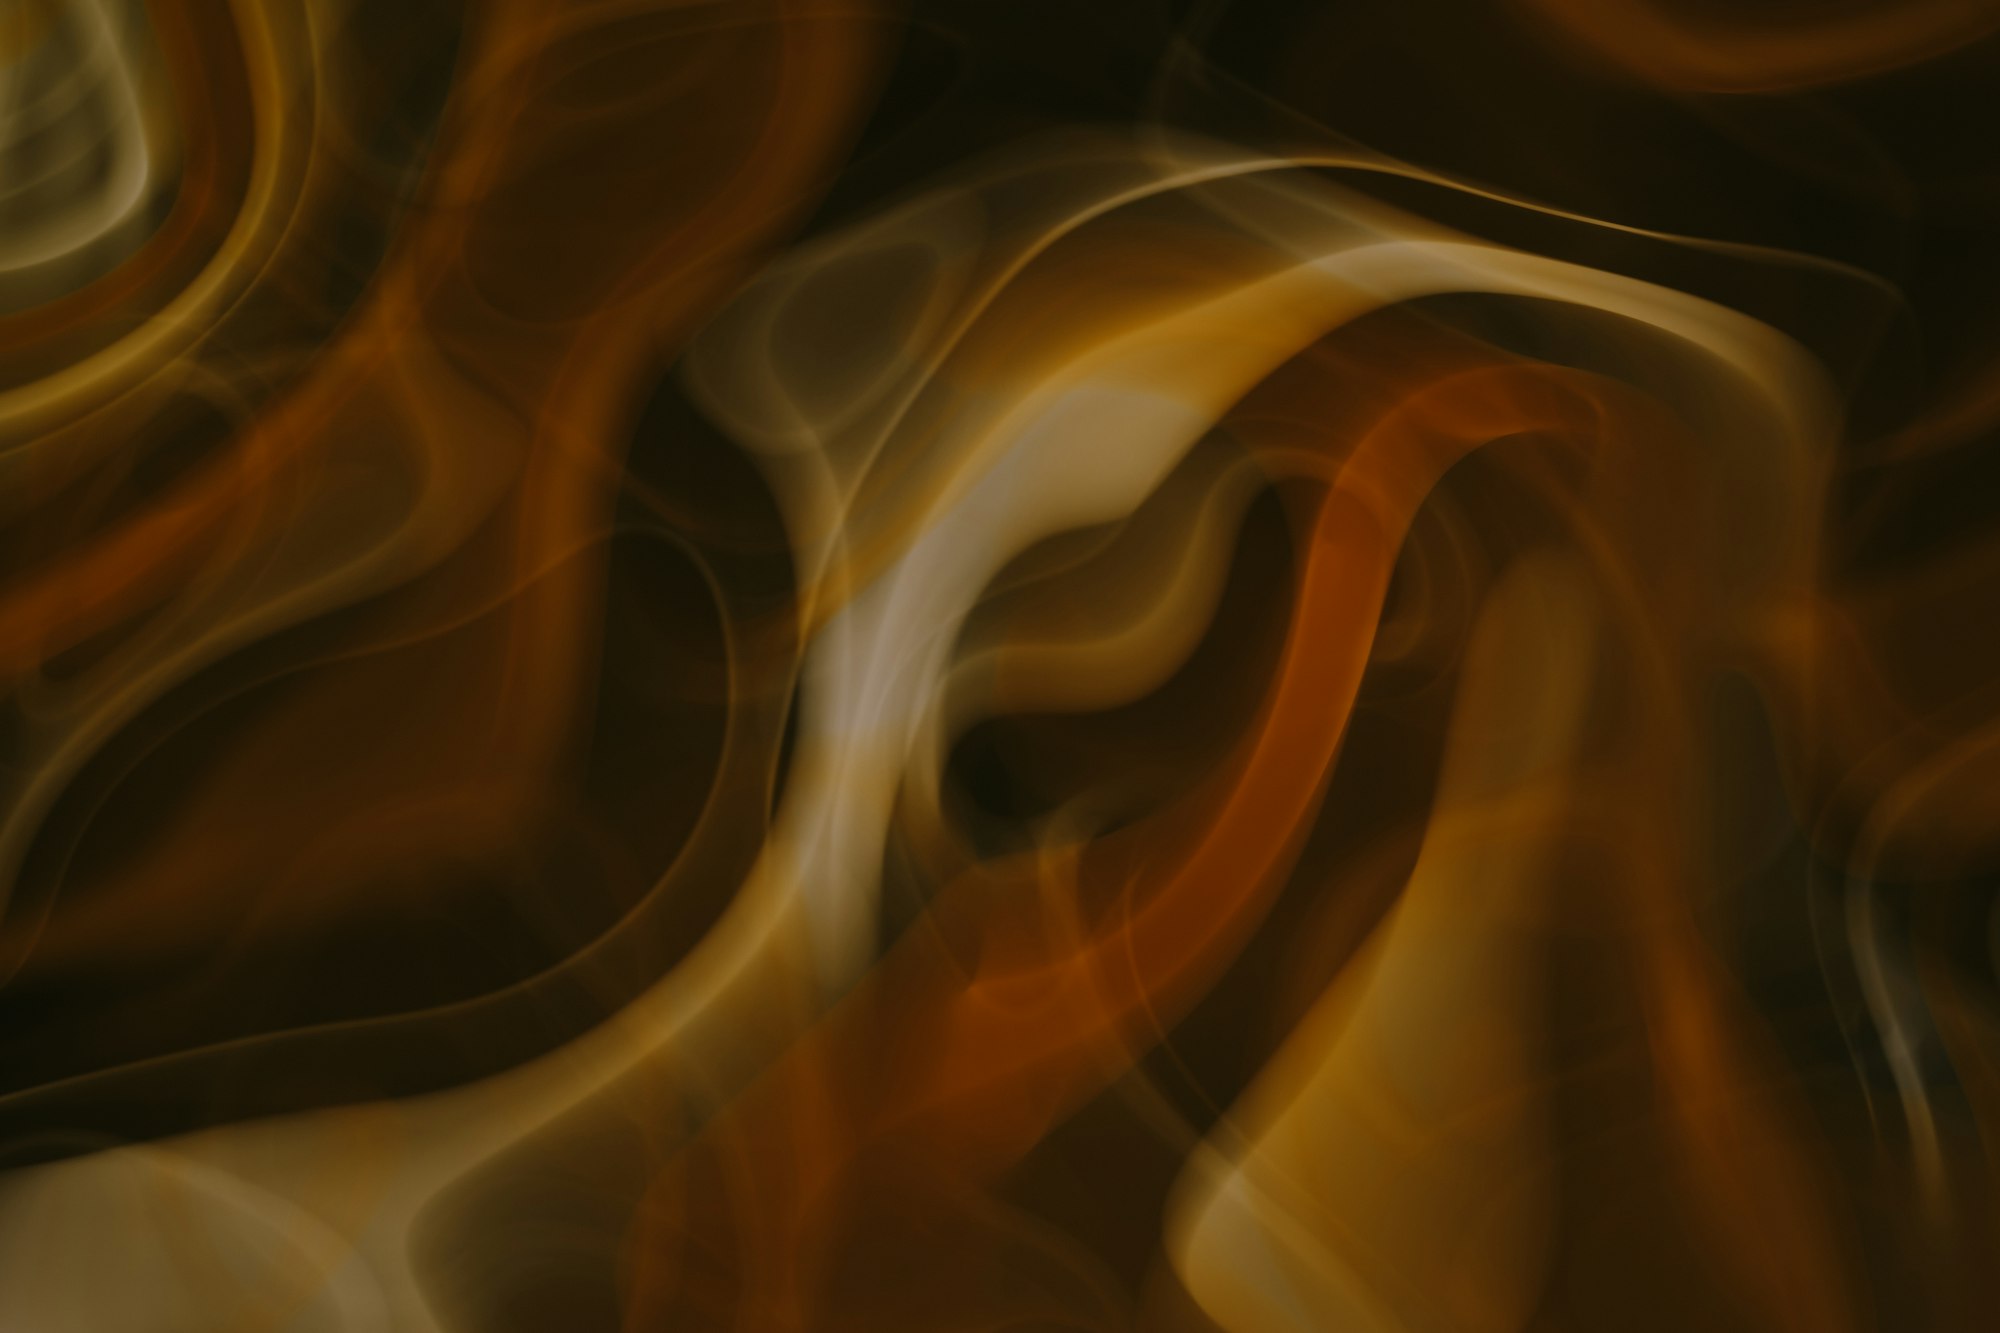 Image of fire swirling around, caught in slow shutter speed via camera. 